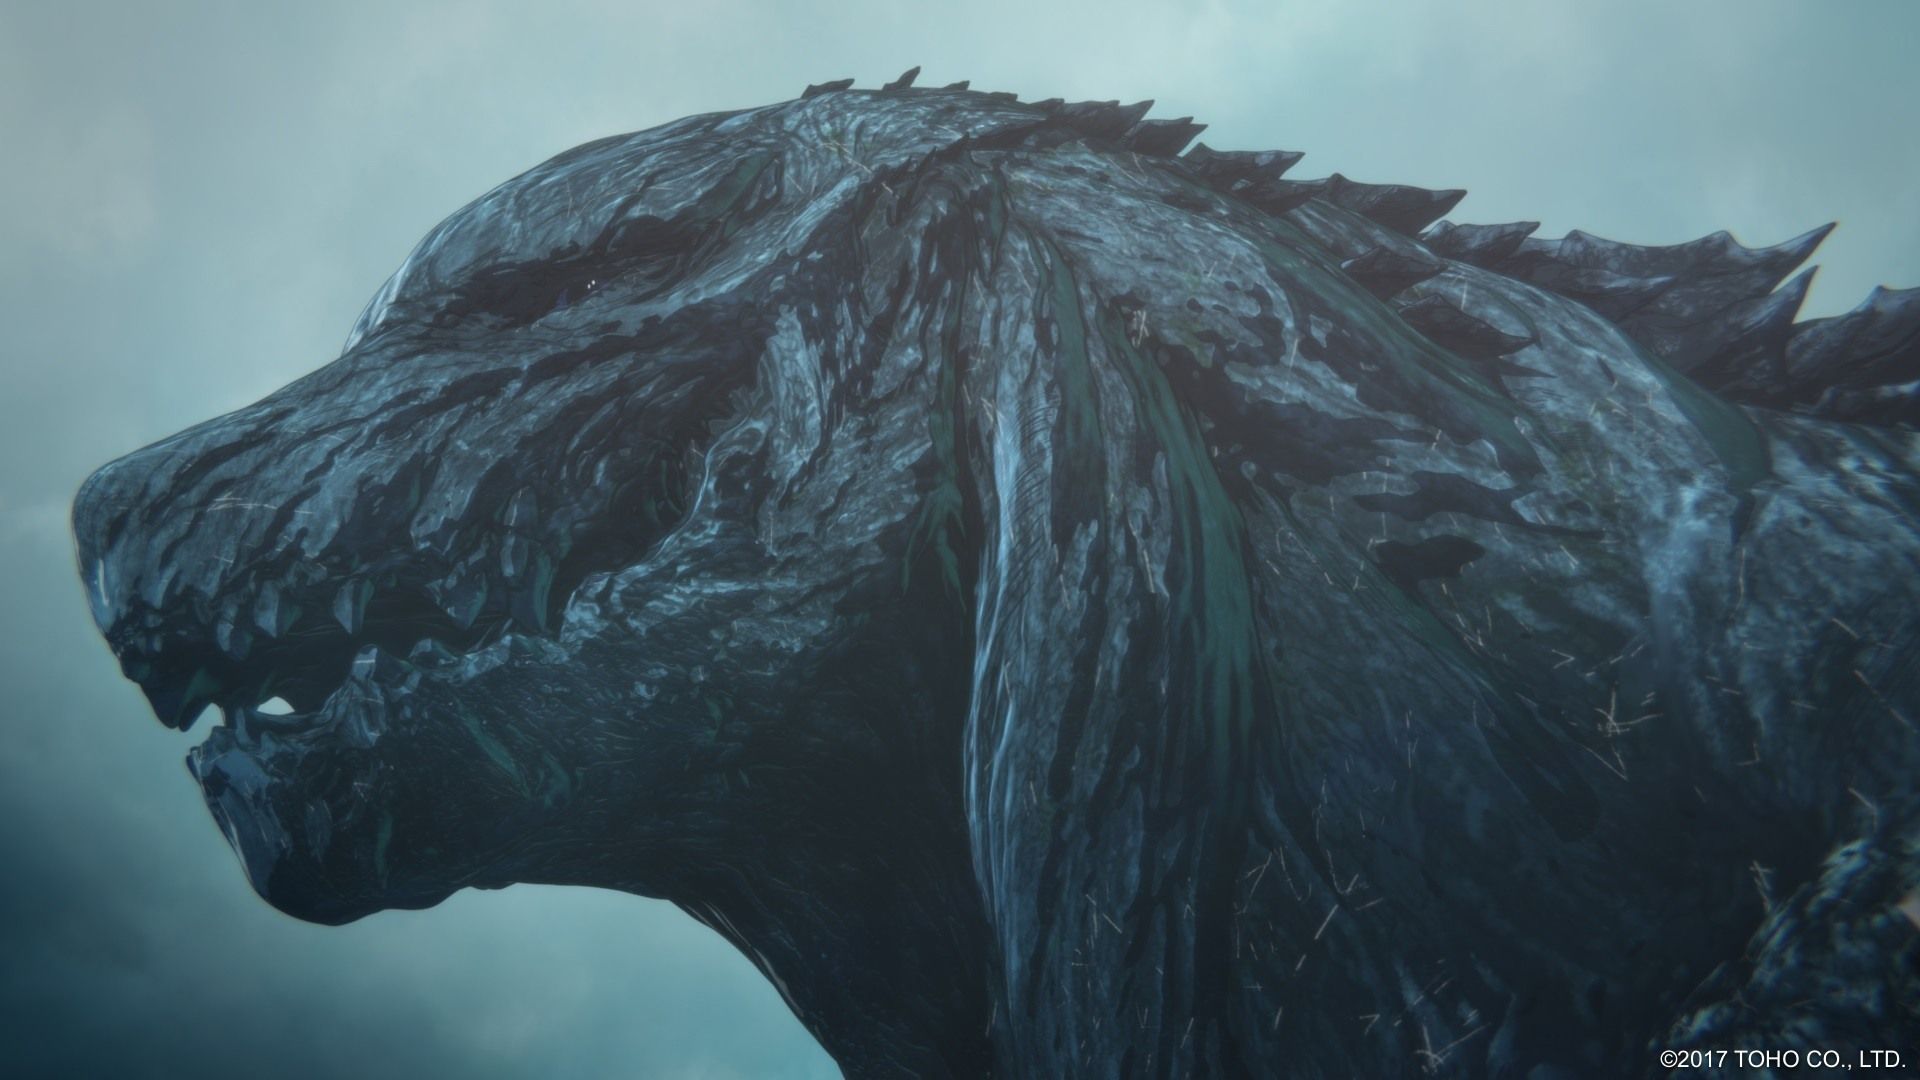 Godzilla: Planet of the Monsters Review